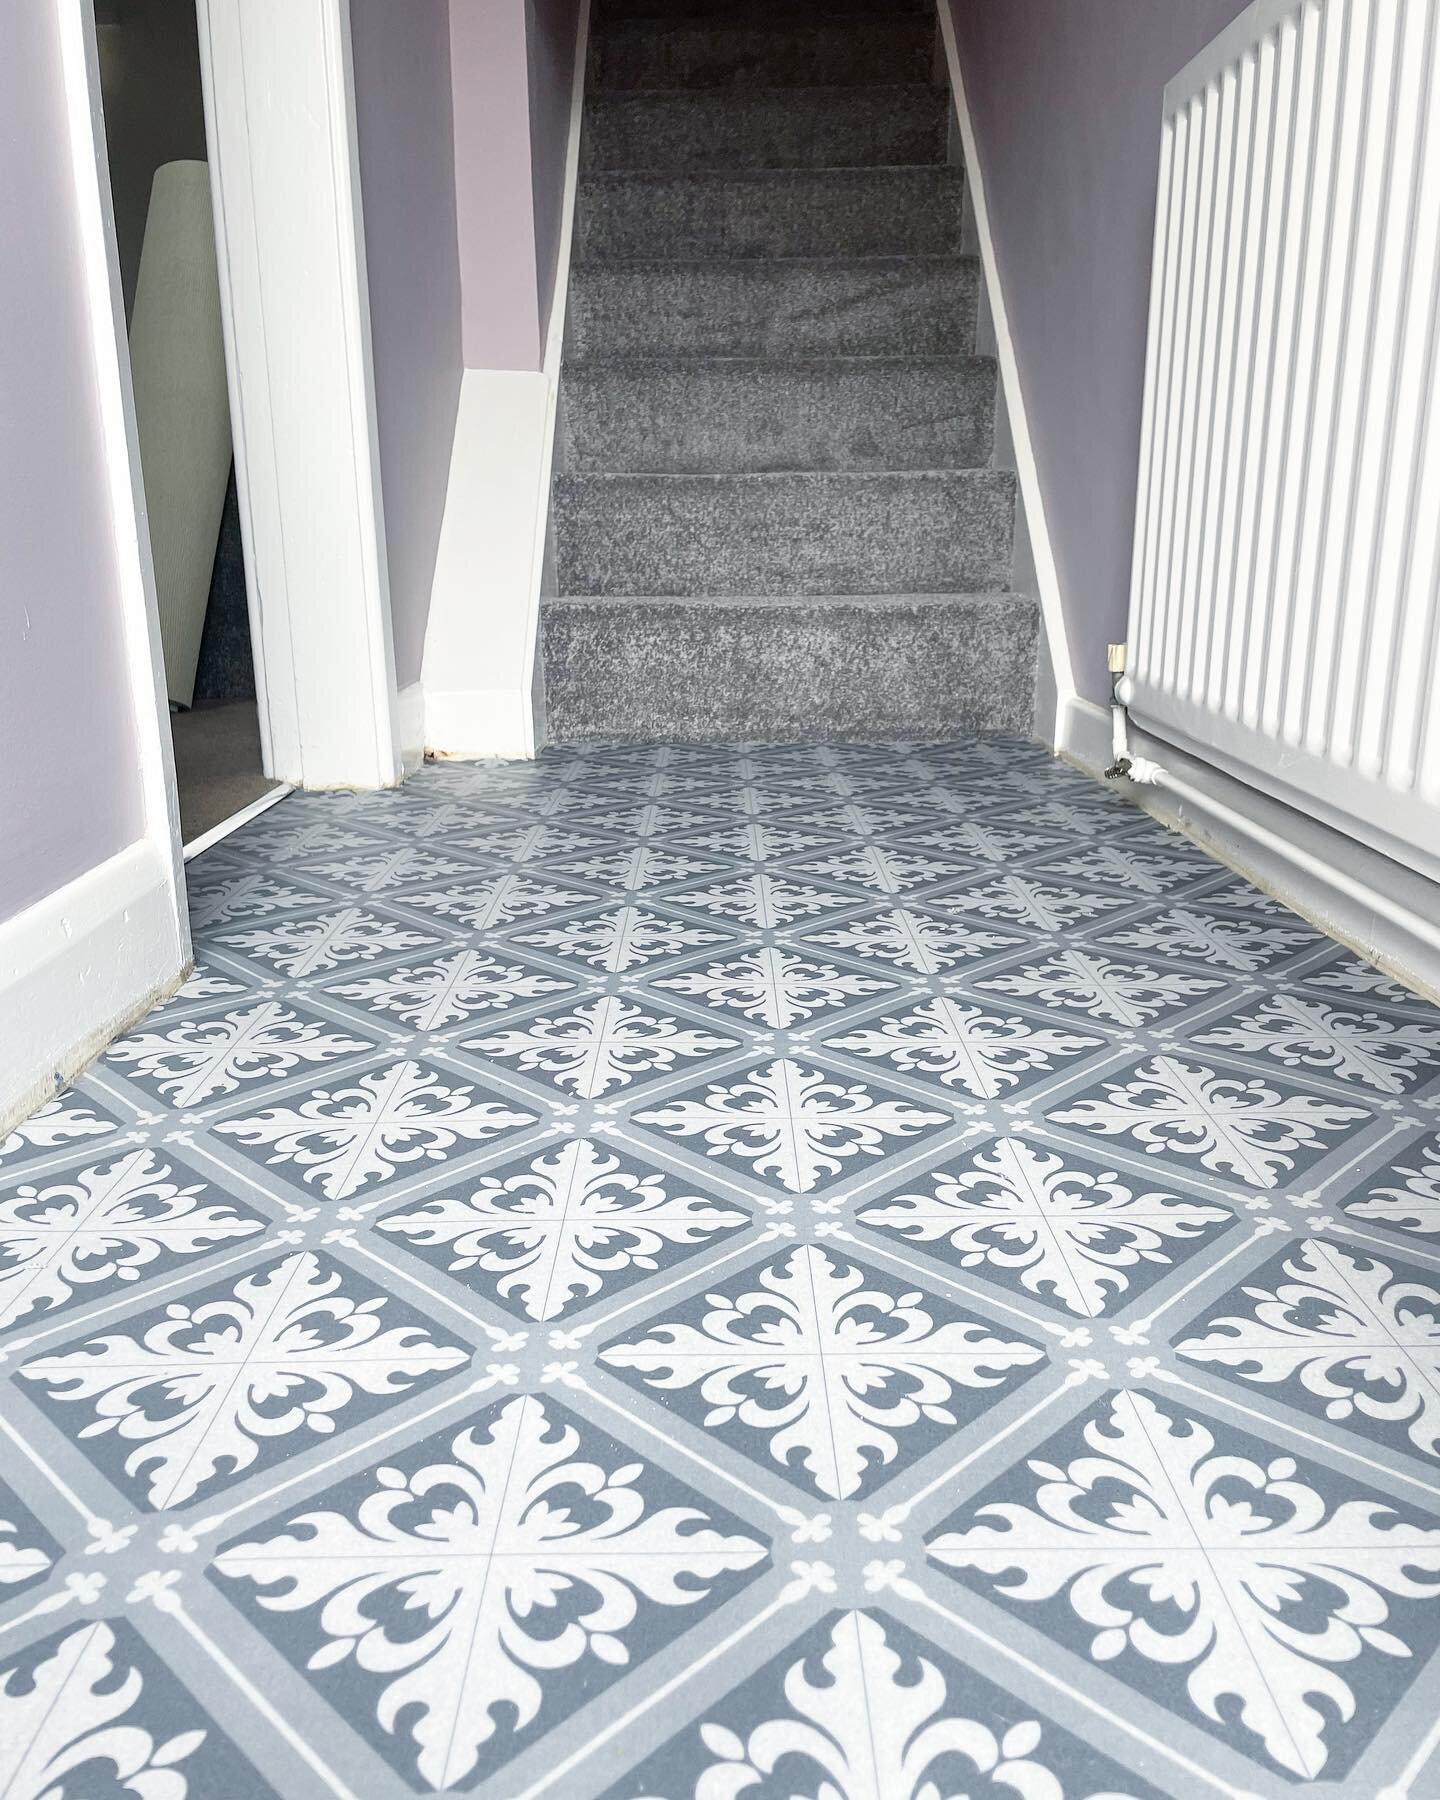 Vinyl from @rhinoflooruk fitted this week as a durable entrance option coupled with Province twist to stairs &amp; landing

____________________________

* Carpets
* LVT
* Laminate 
* Vinyl 
____________________________

* Free Advice &amp; Quotation